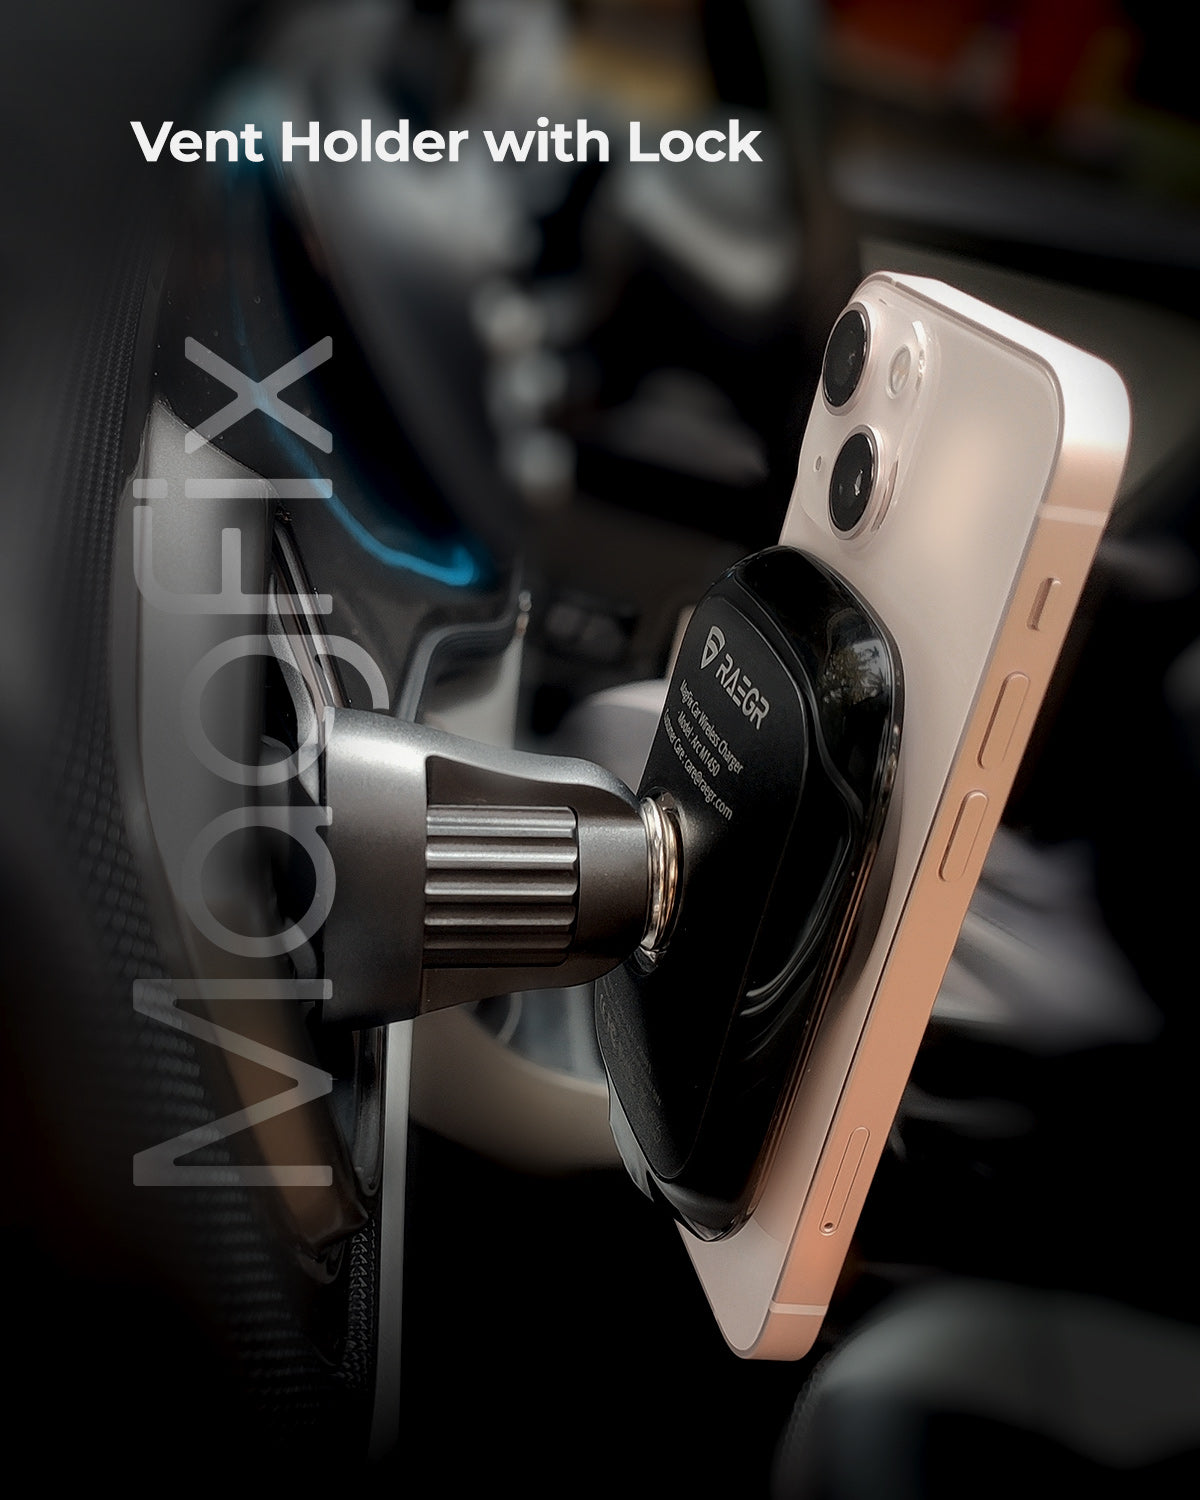 RAEGR MagFix Arc M1450C 15W Car Magnetic Wireless Charger with Air Vent with Lock & Foldable Stand Magnet Holder Compatible for iPhone 15 & 14  Series